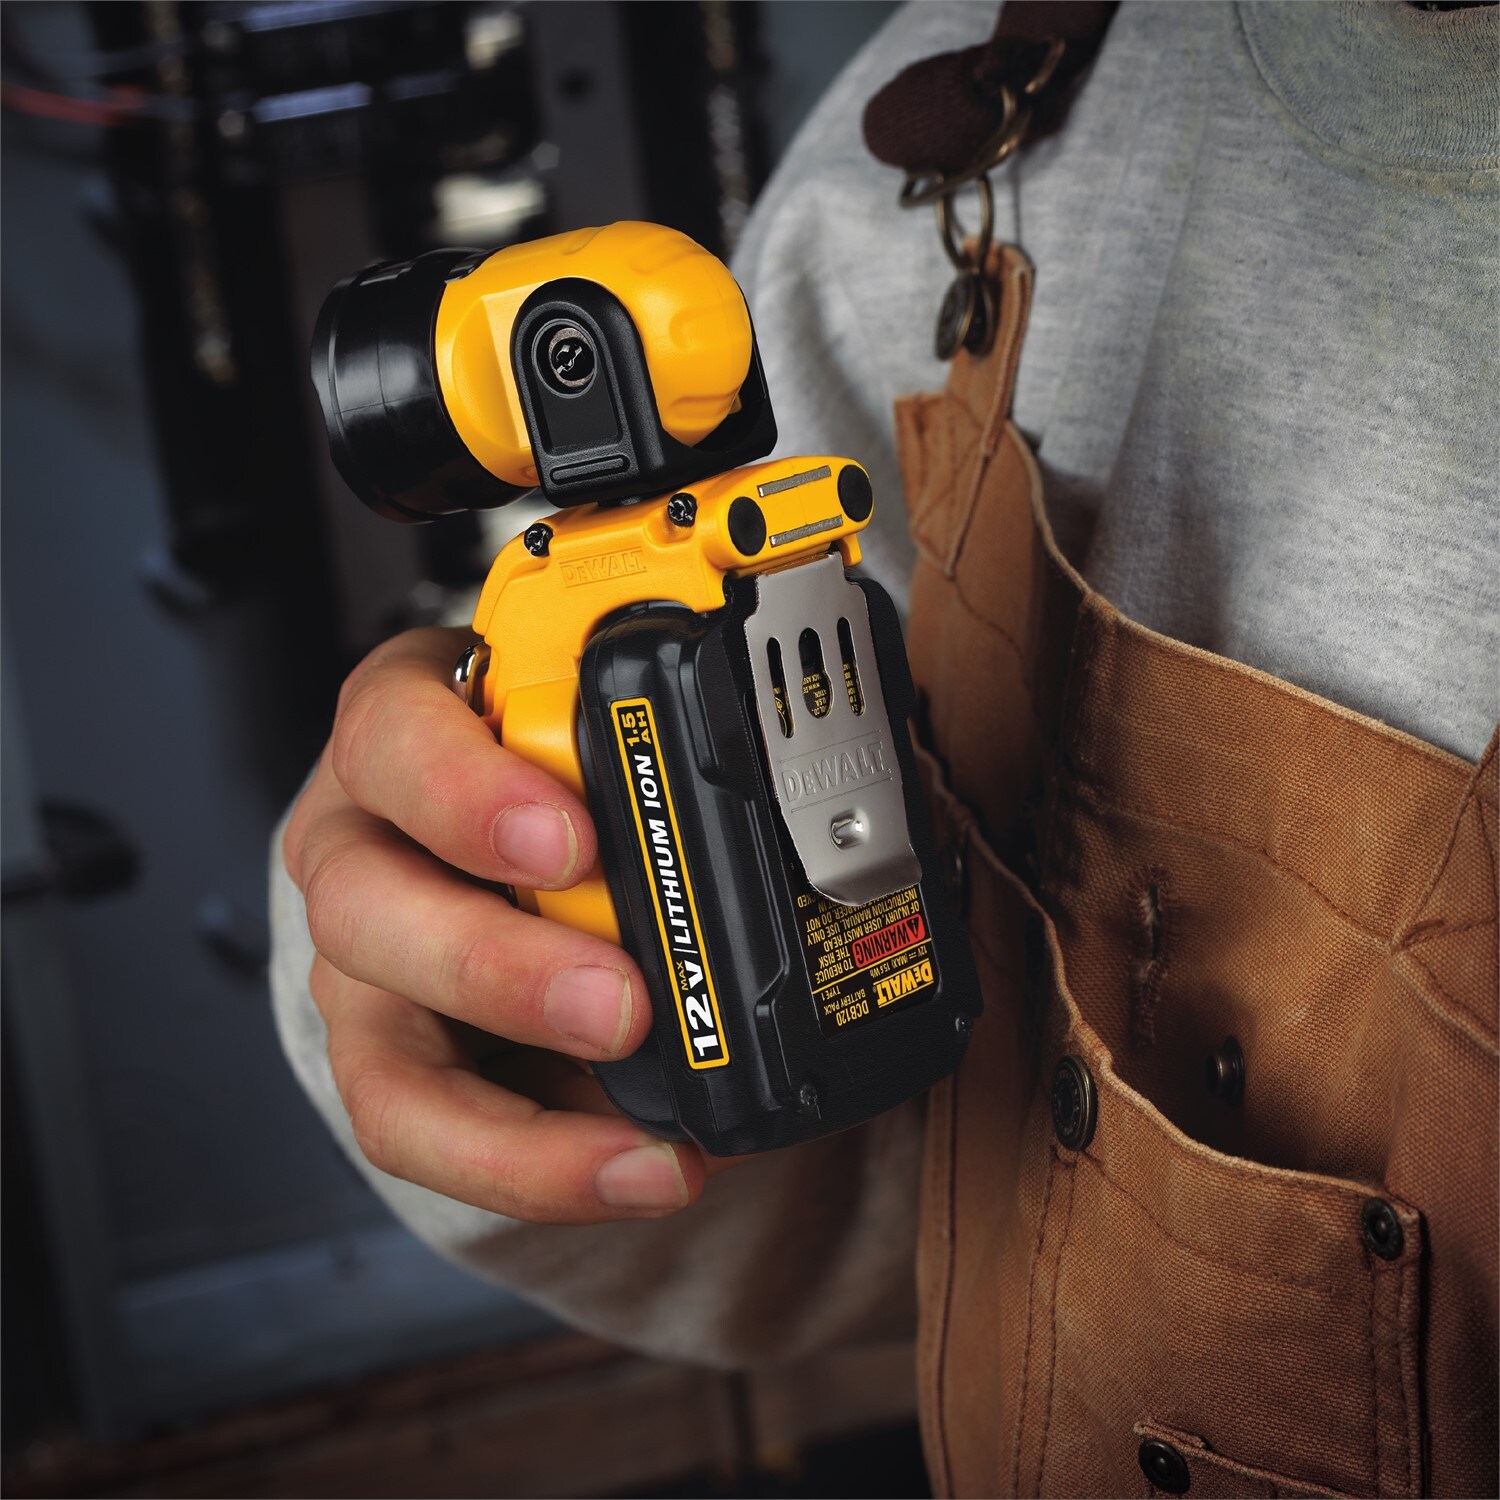 Ion DEWALT Lithium 12-volt Max Flashlight LED Rechargeable (li-ion) Flashlights Tool the department at in Power 130-Lumen Tool Power Cordless